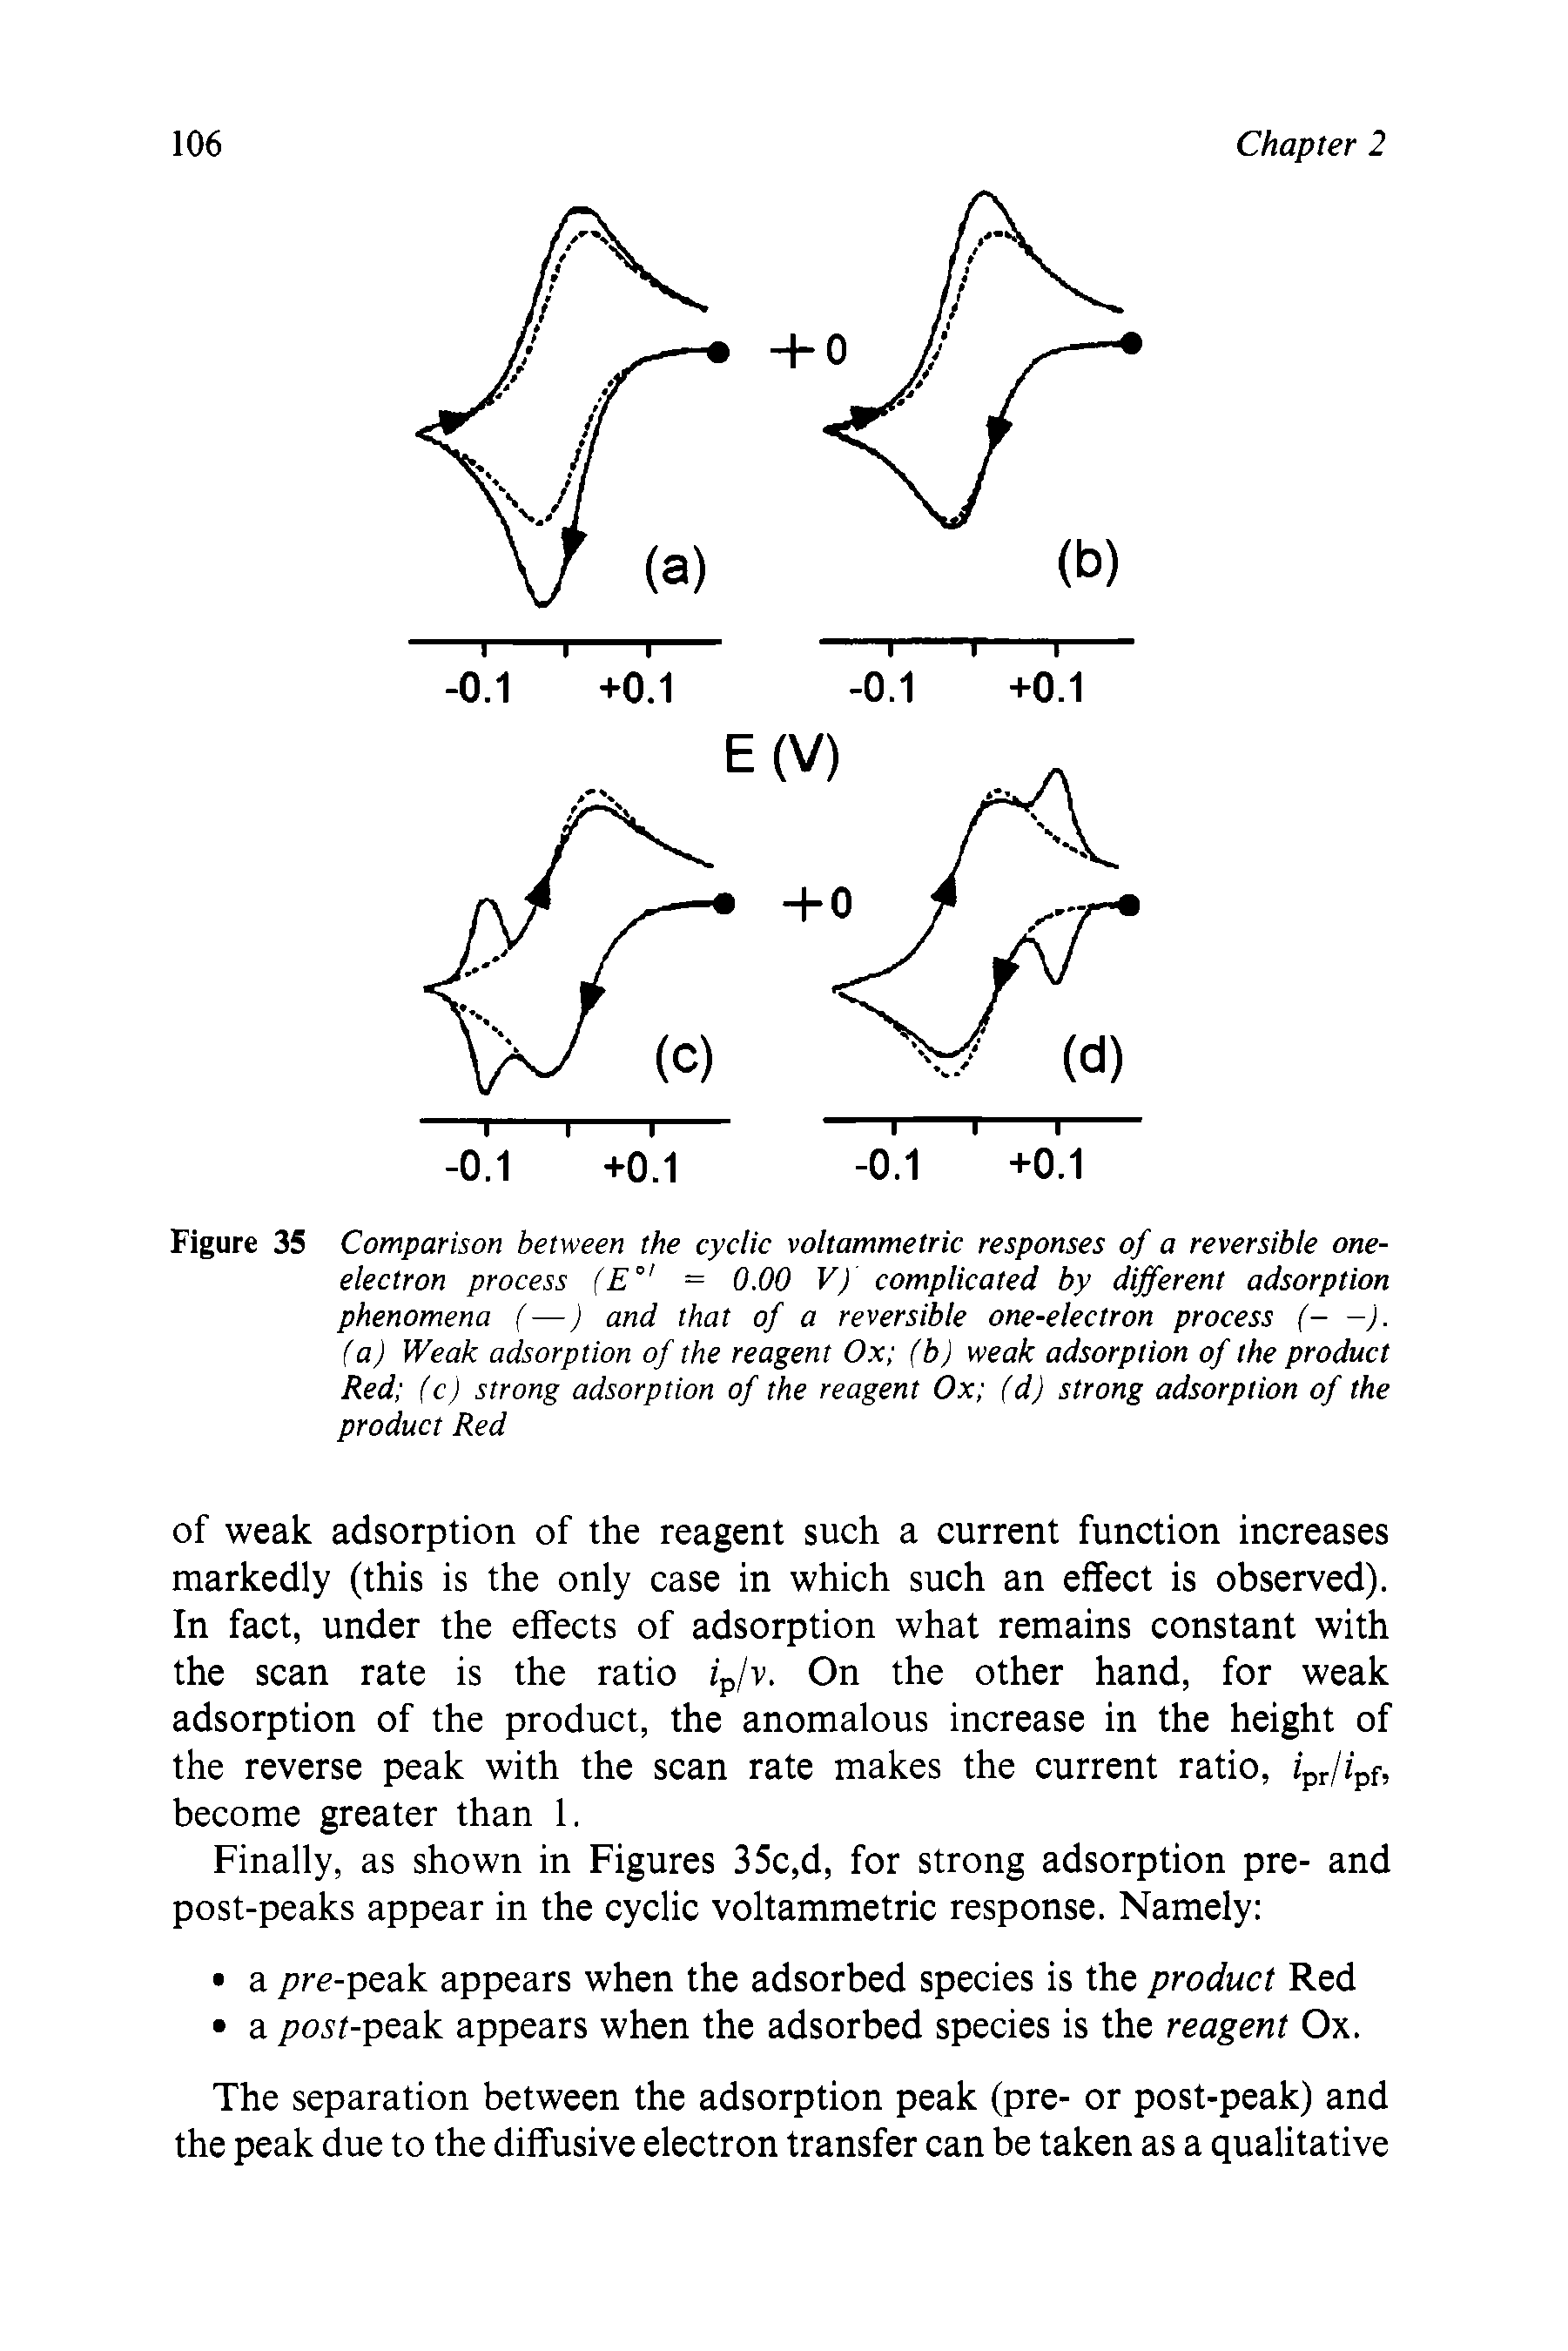 Figure 35 Comparison between the cyclic voltammetric responses of a reversible one-electron process E° = 0.00 V) complicated by different adsorption phenomena (—) and that of a reversible one-electron process (- -). (a) Weak adsorption of the reagent Ox (b) weak adsorption of the product Red (c) strong adsorption of the reagent Ox (d) strong adsorption of the product Red...